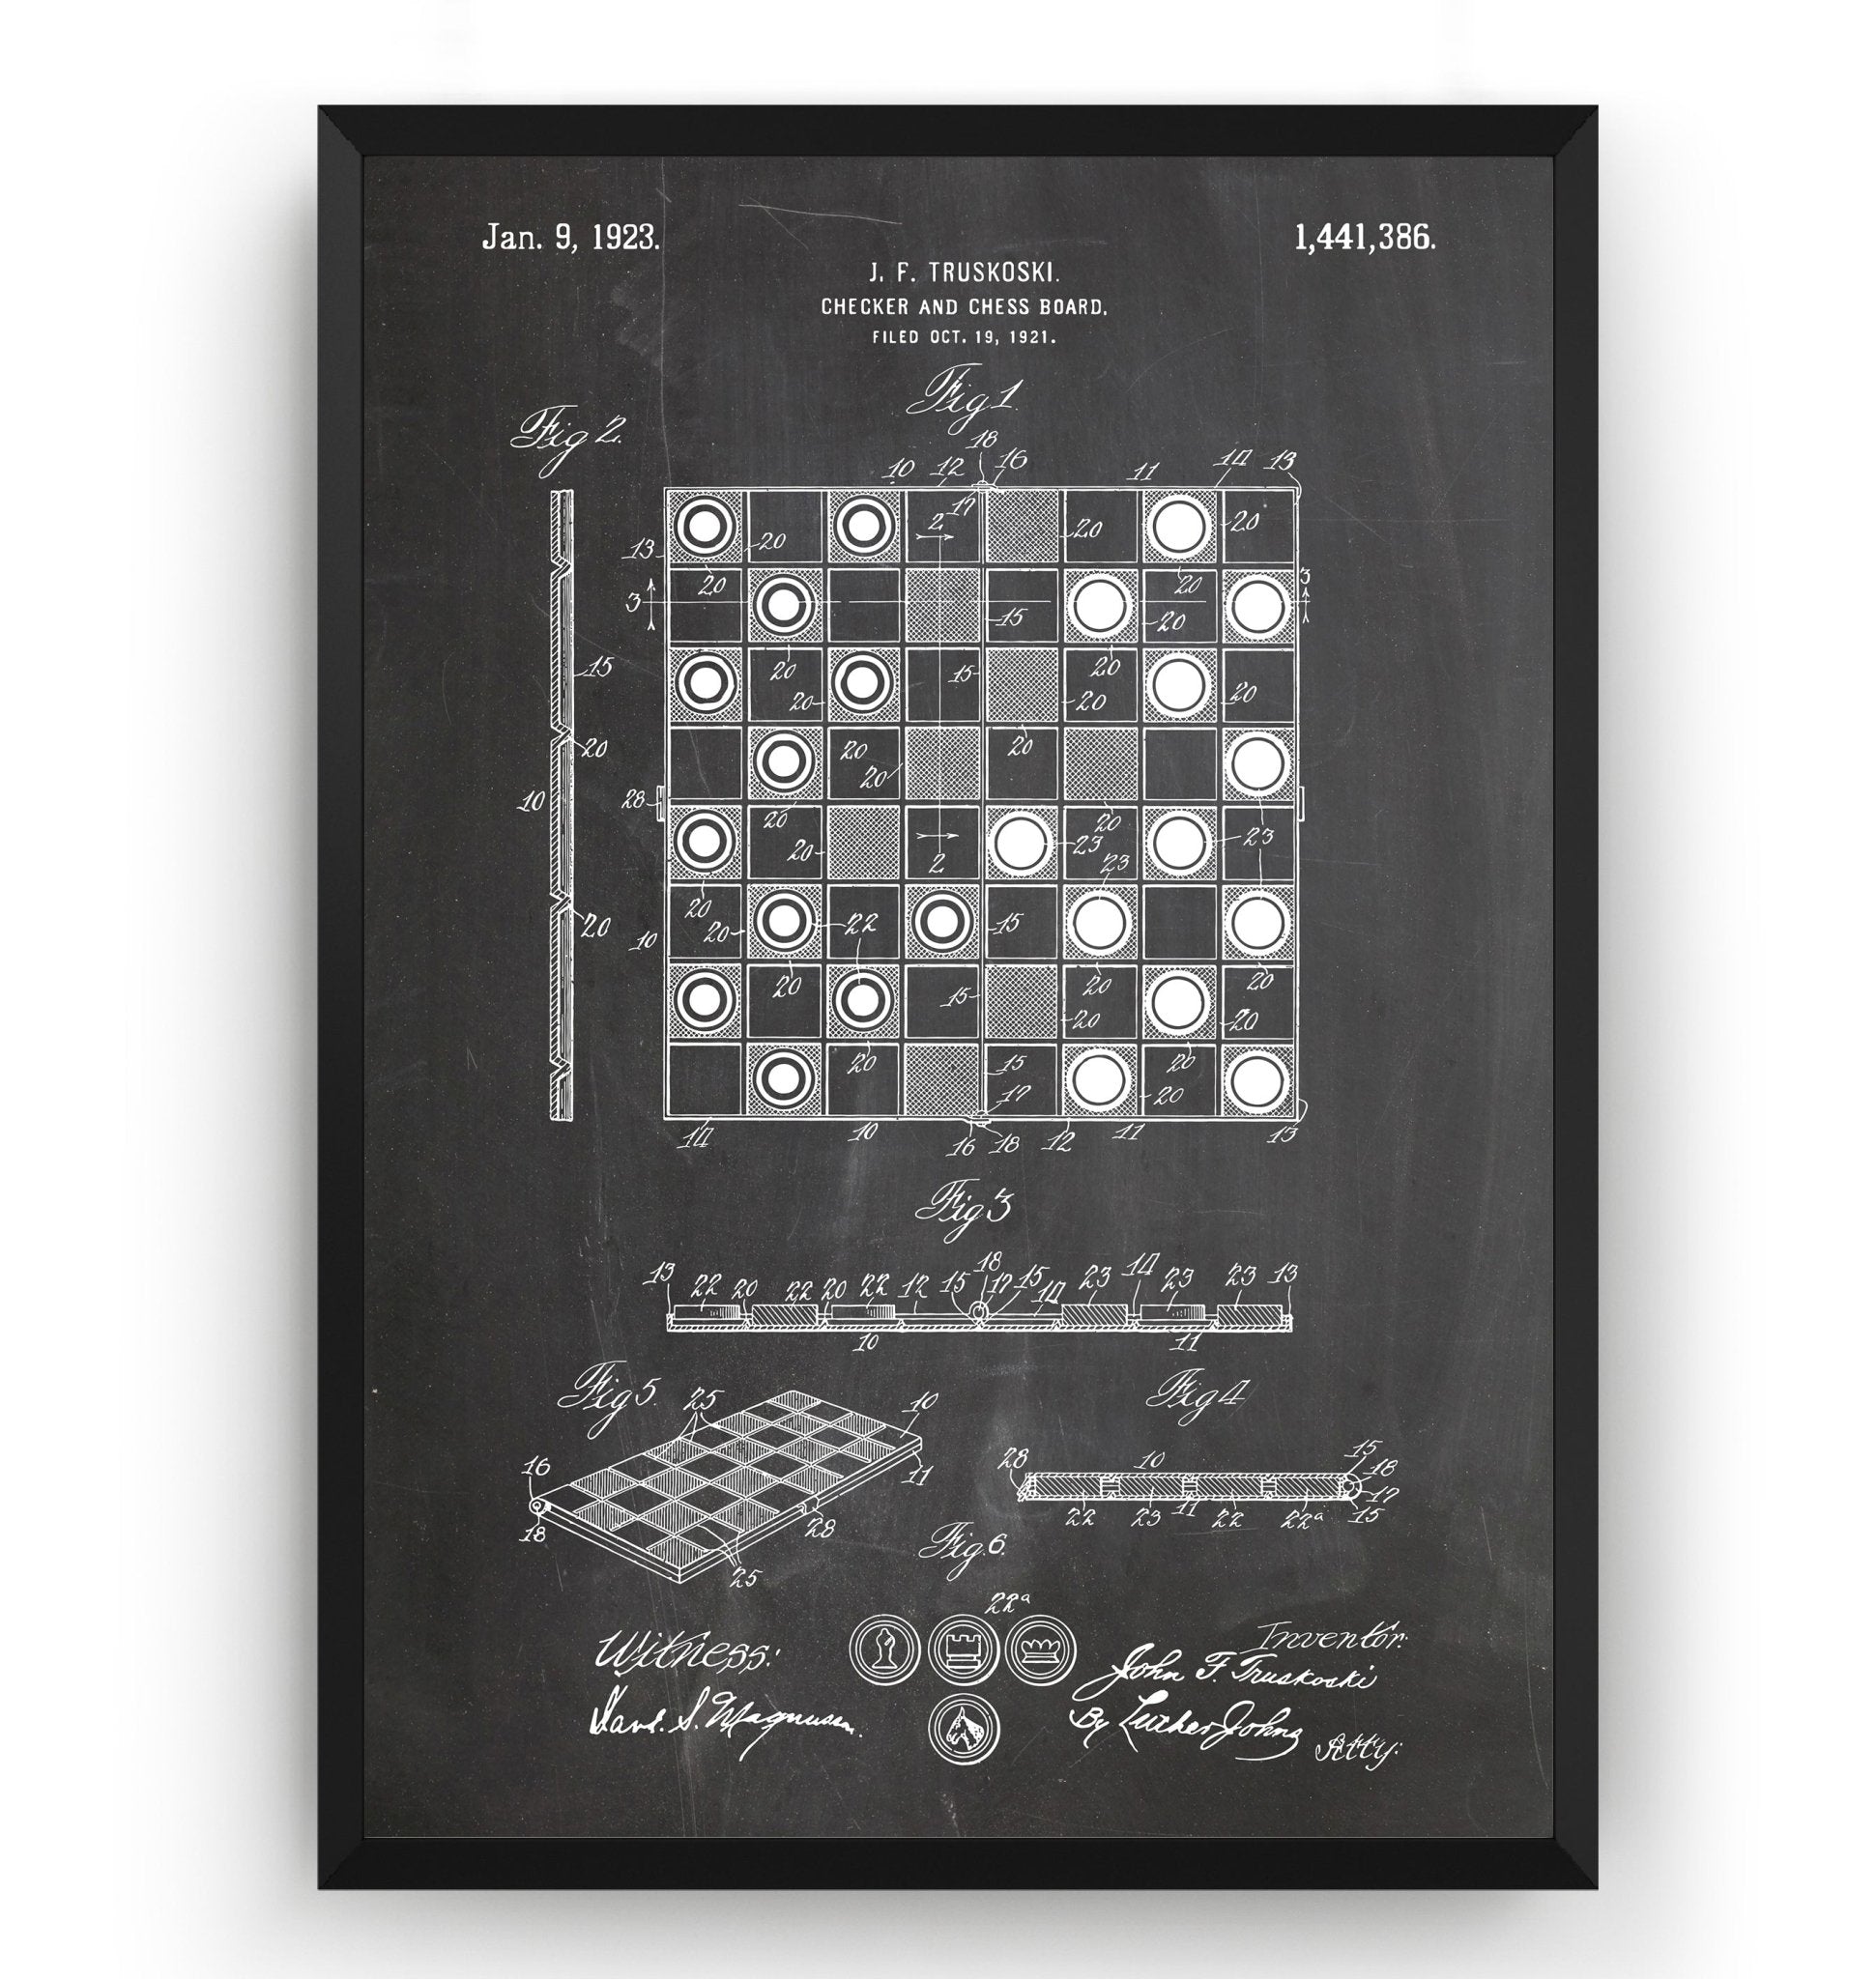 Checkers Draughts And Chessboard 1923 Patent Print - Magic Posters